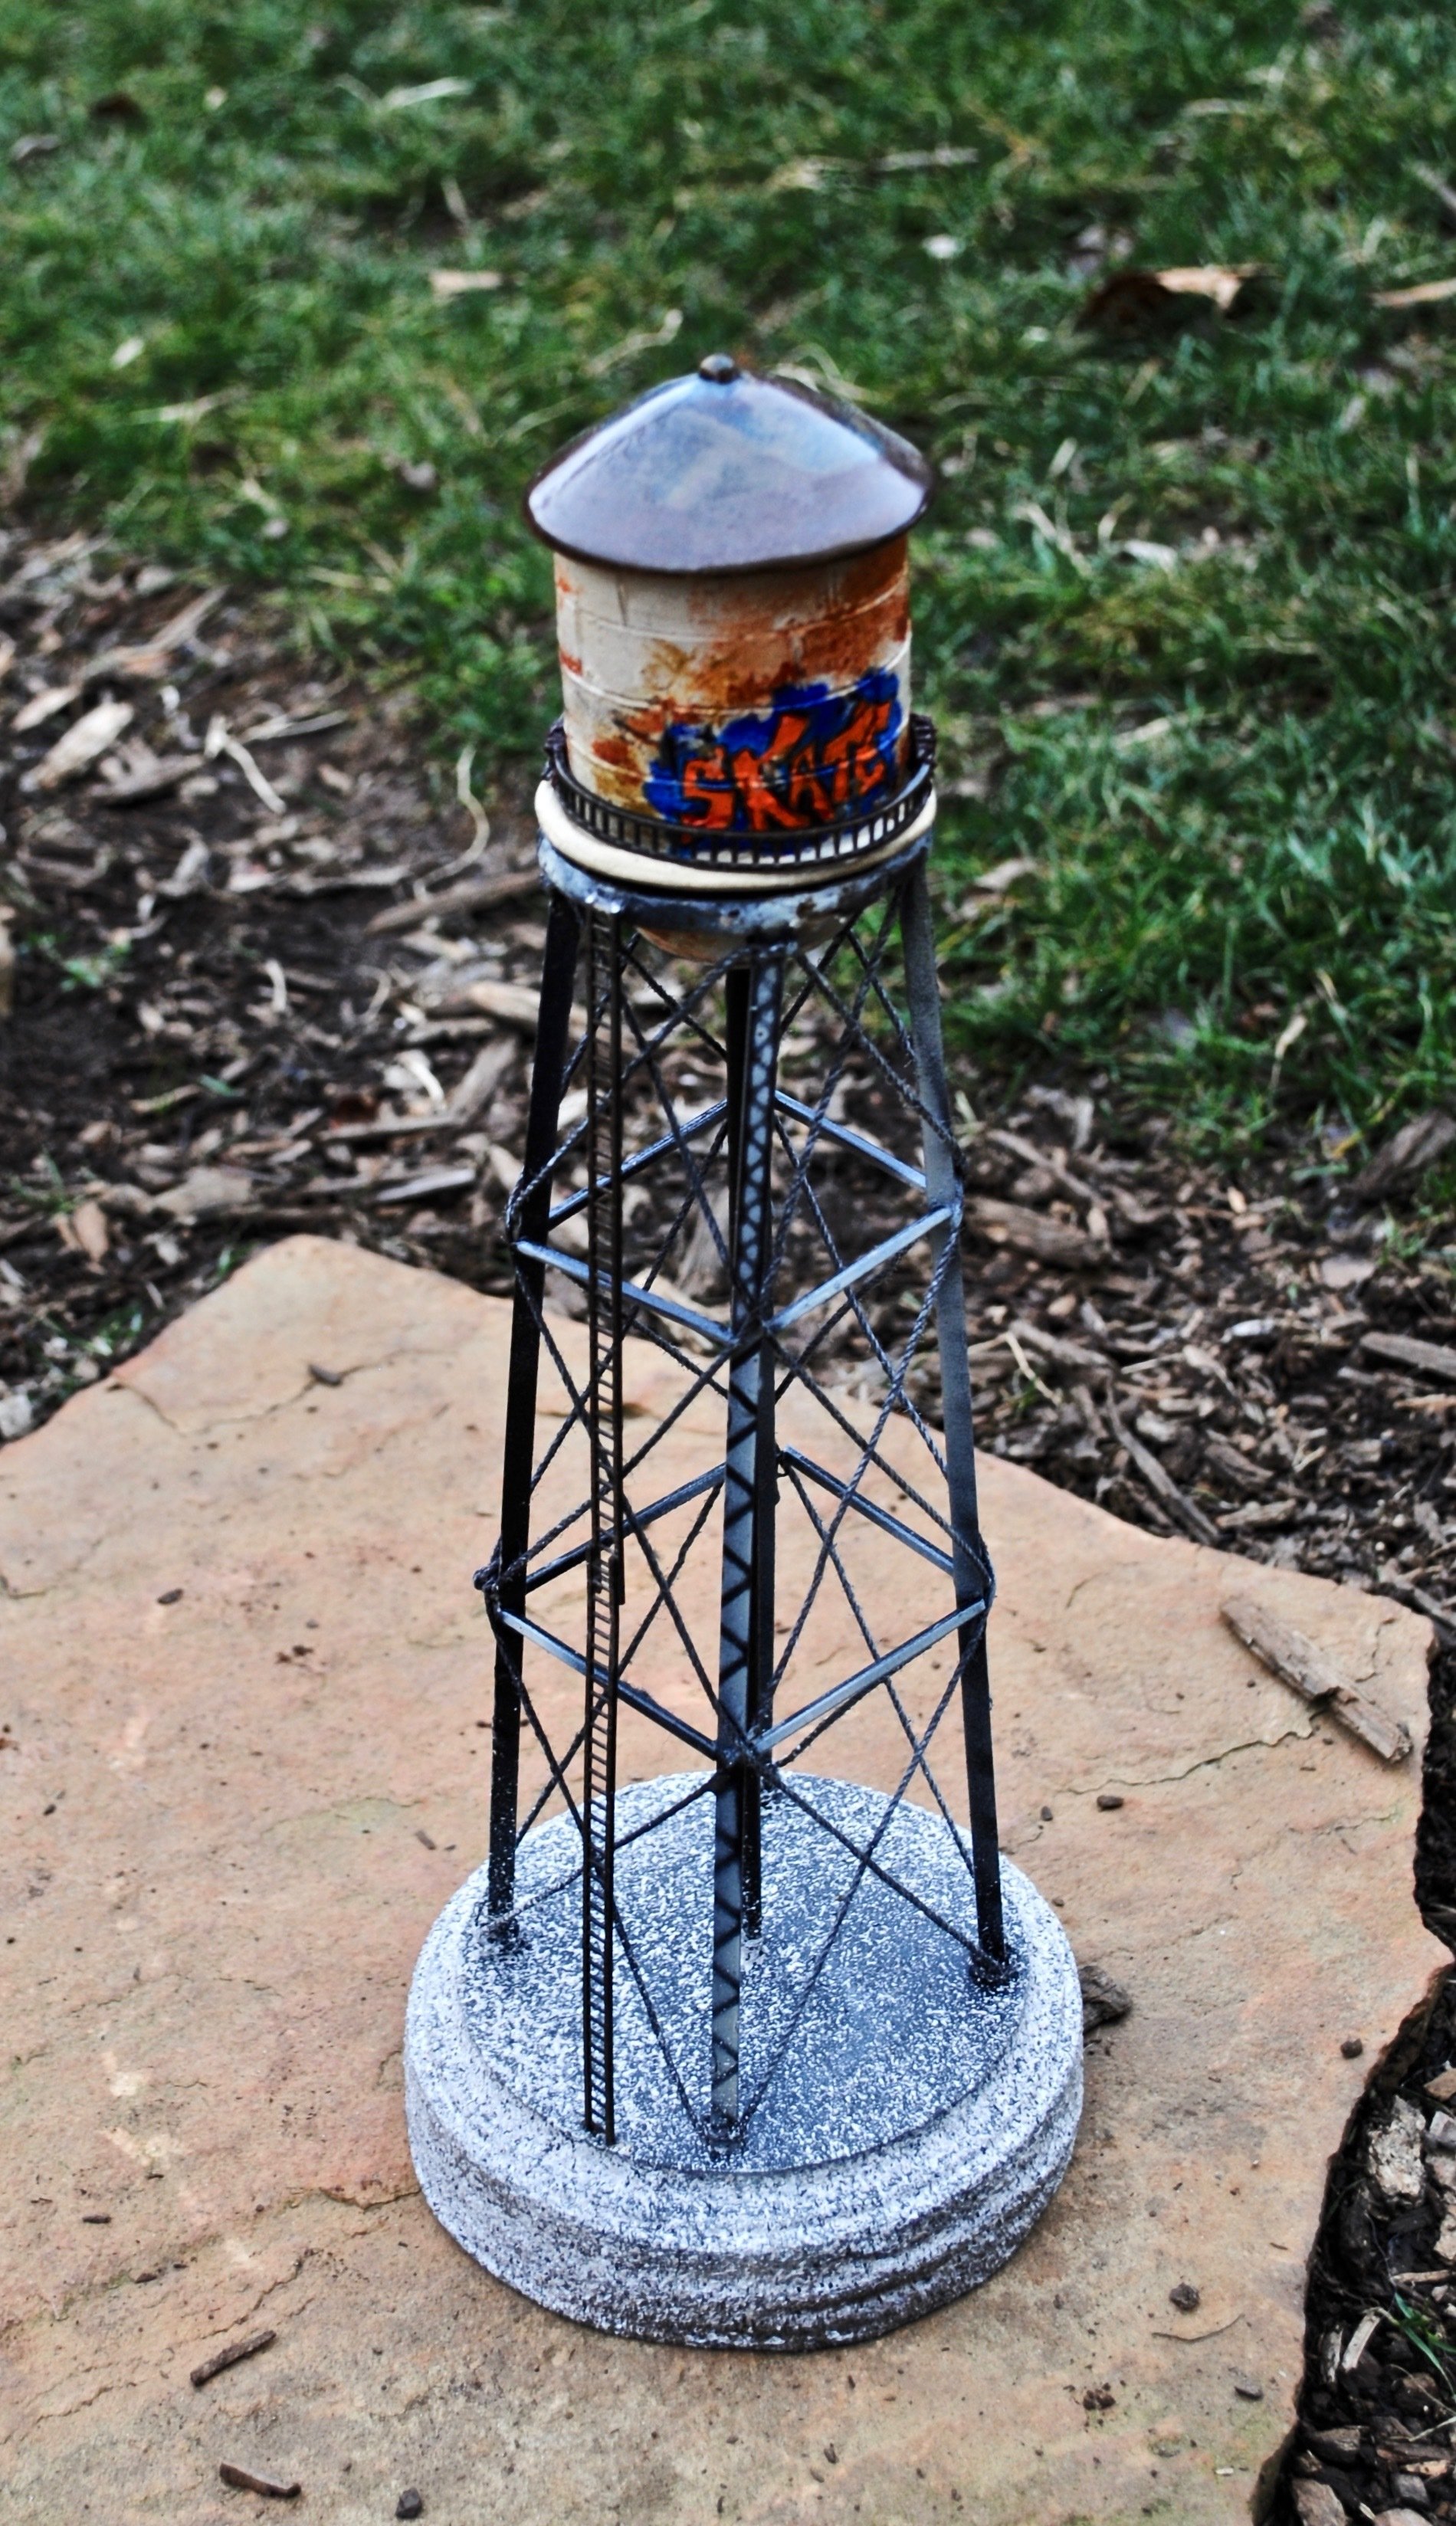 "Skate" tiny water tower